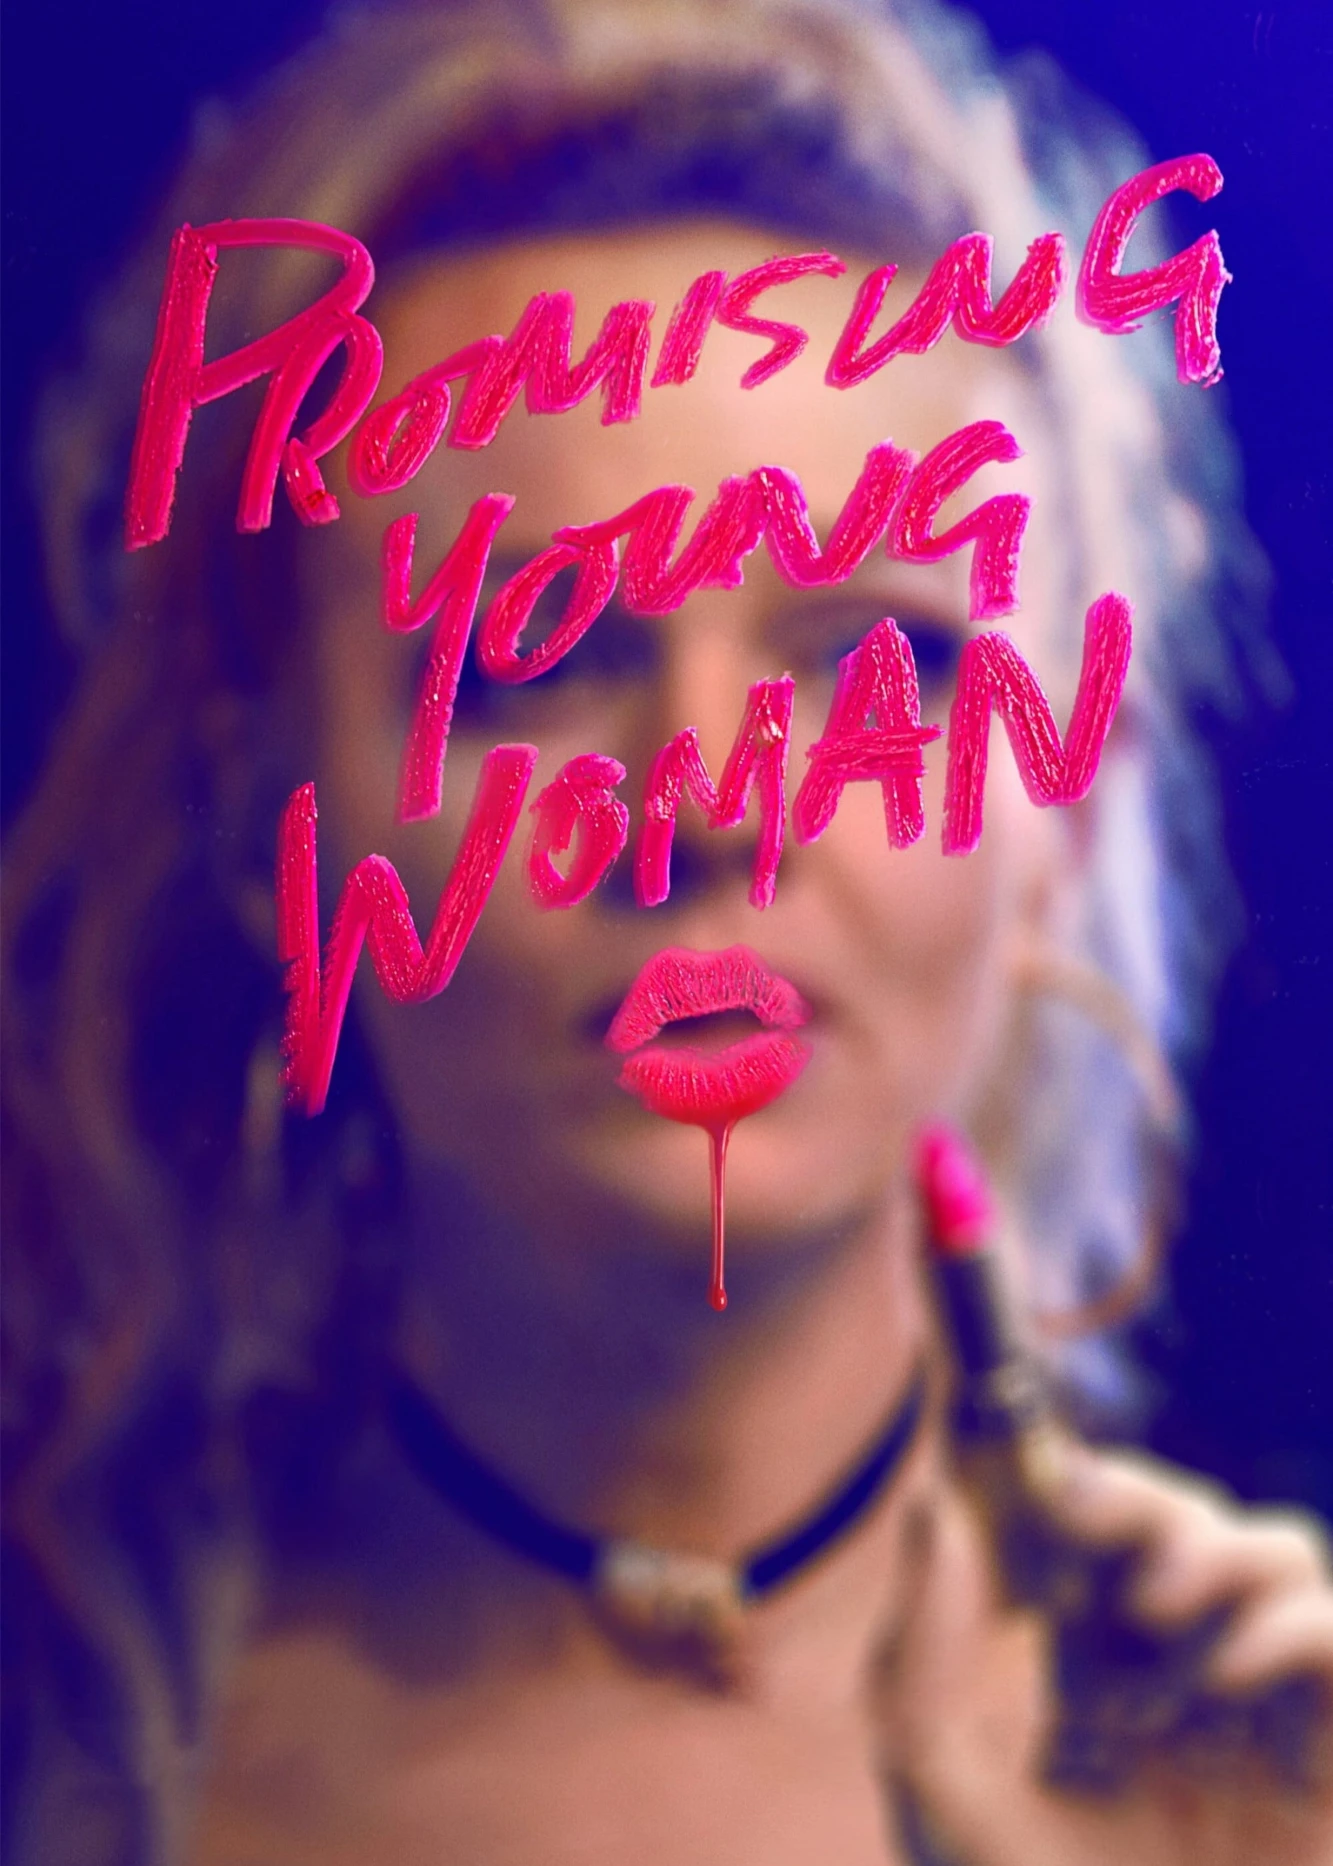 Promising Young Woman | Promising Young Woman (2020)